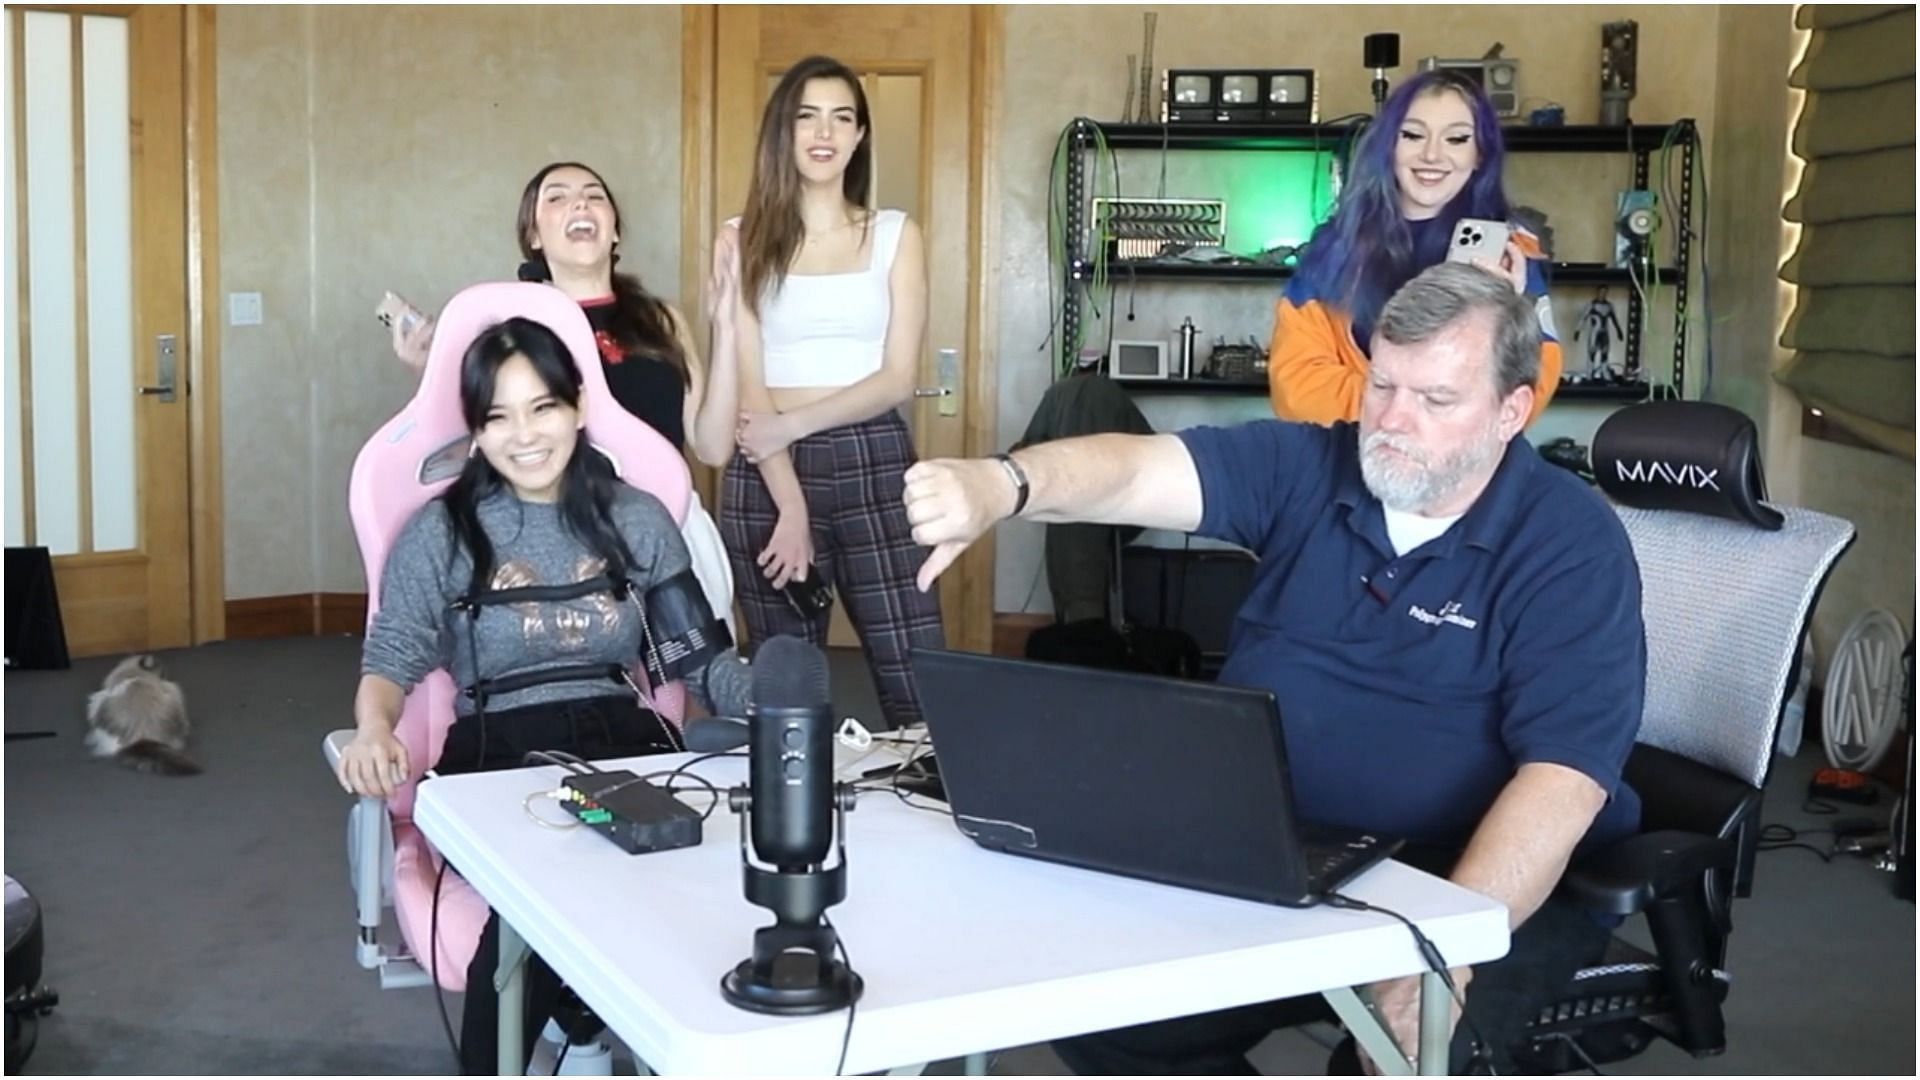 CodeMiko gets asked questions while hooked up to a lie detector test (Image via Twitch CodeMiko)